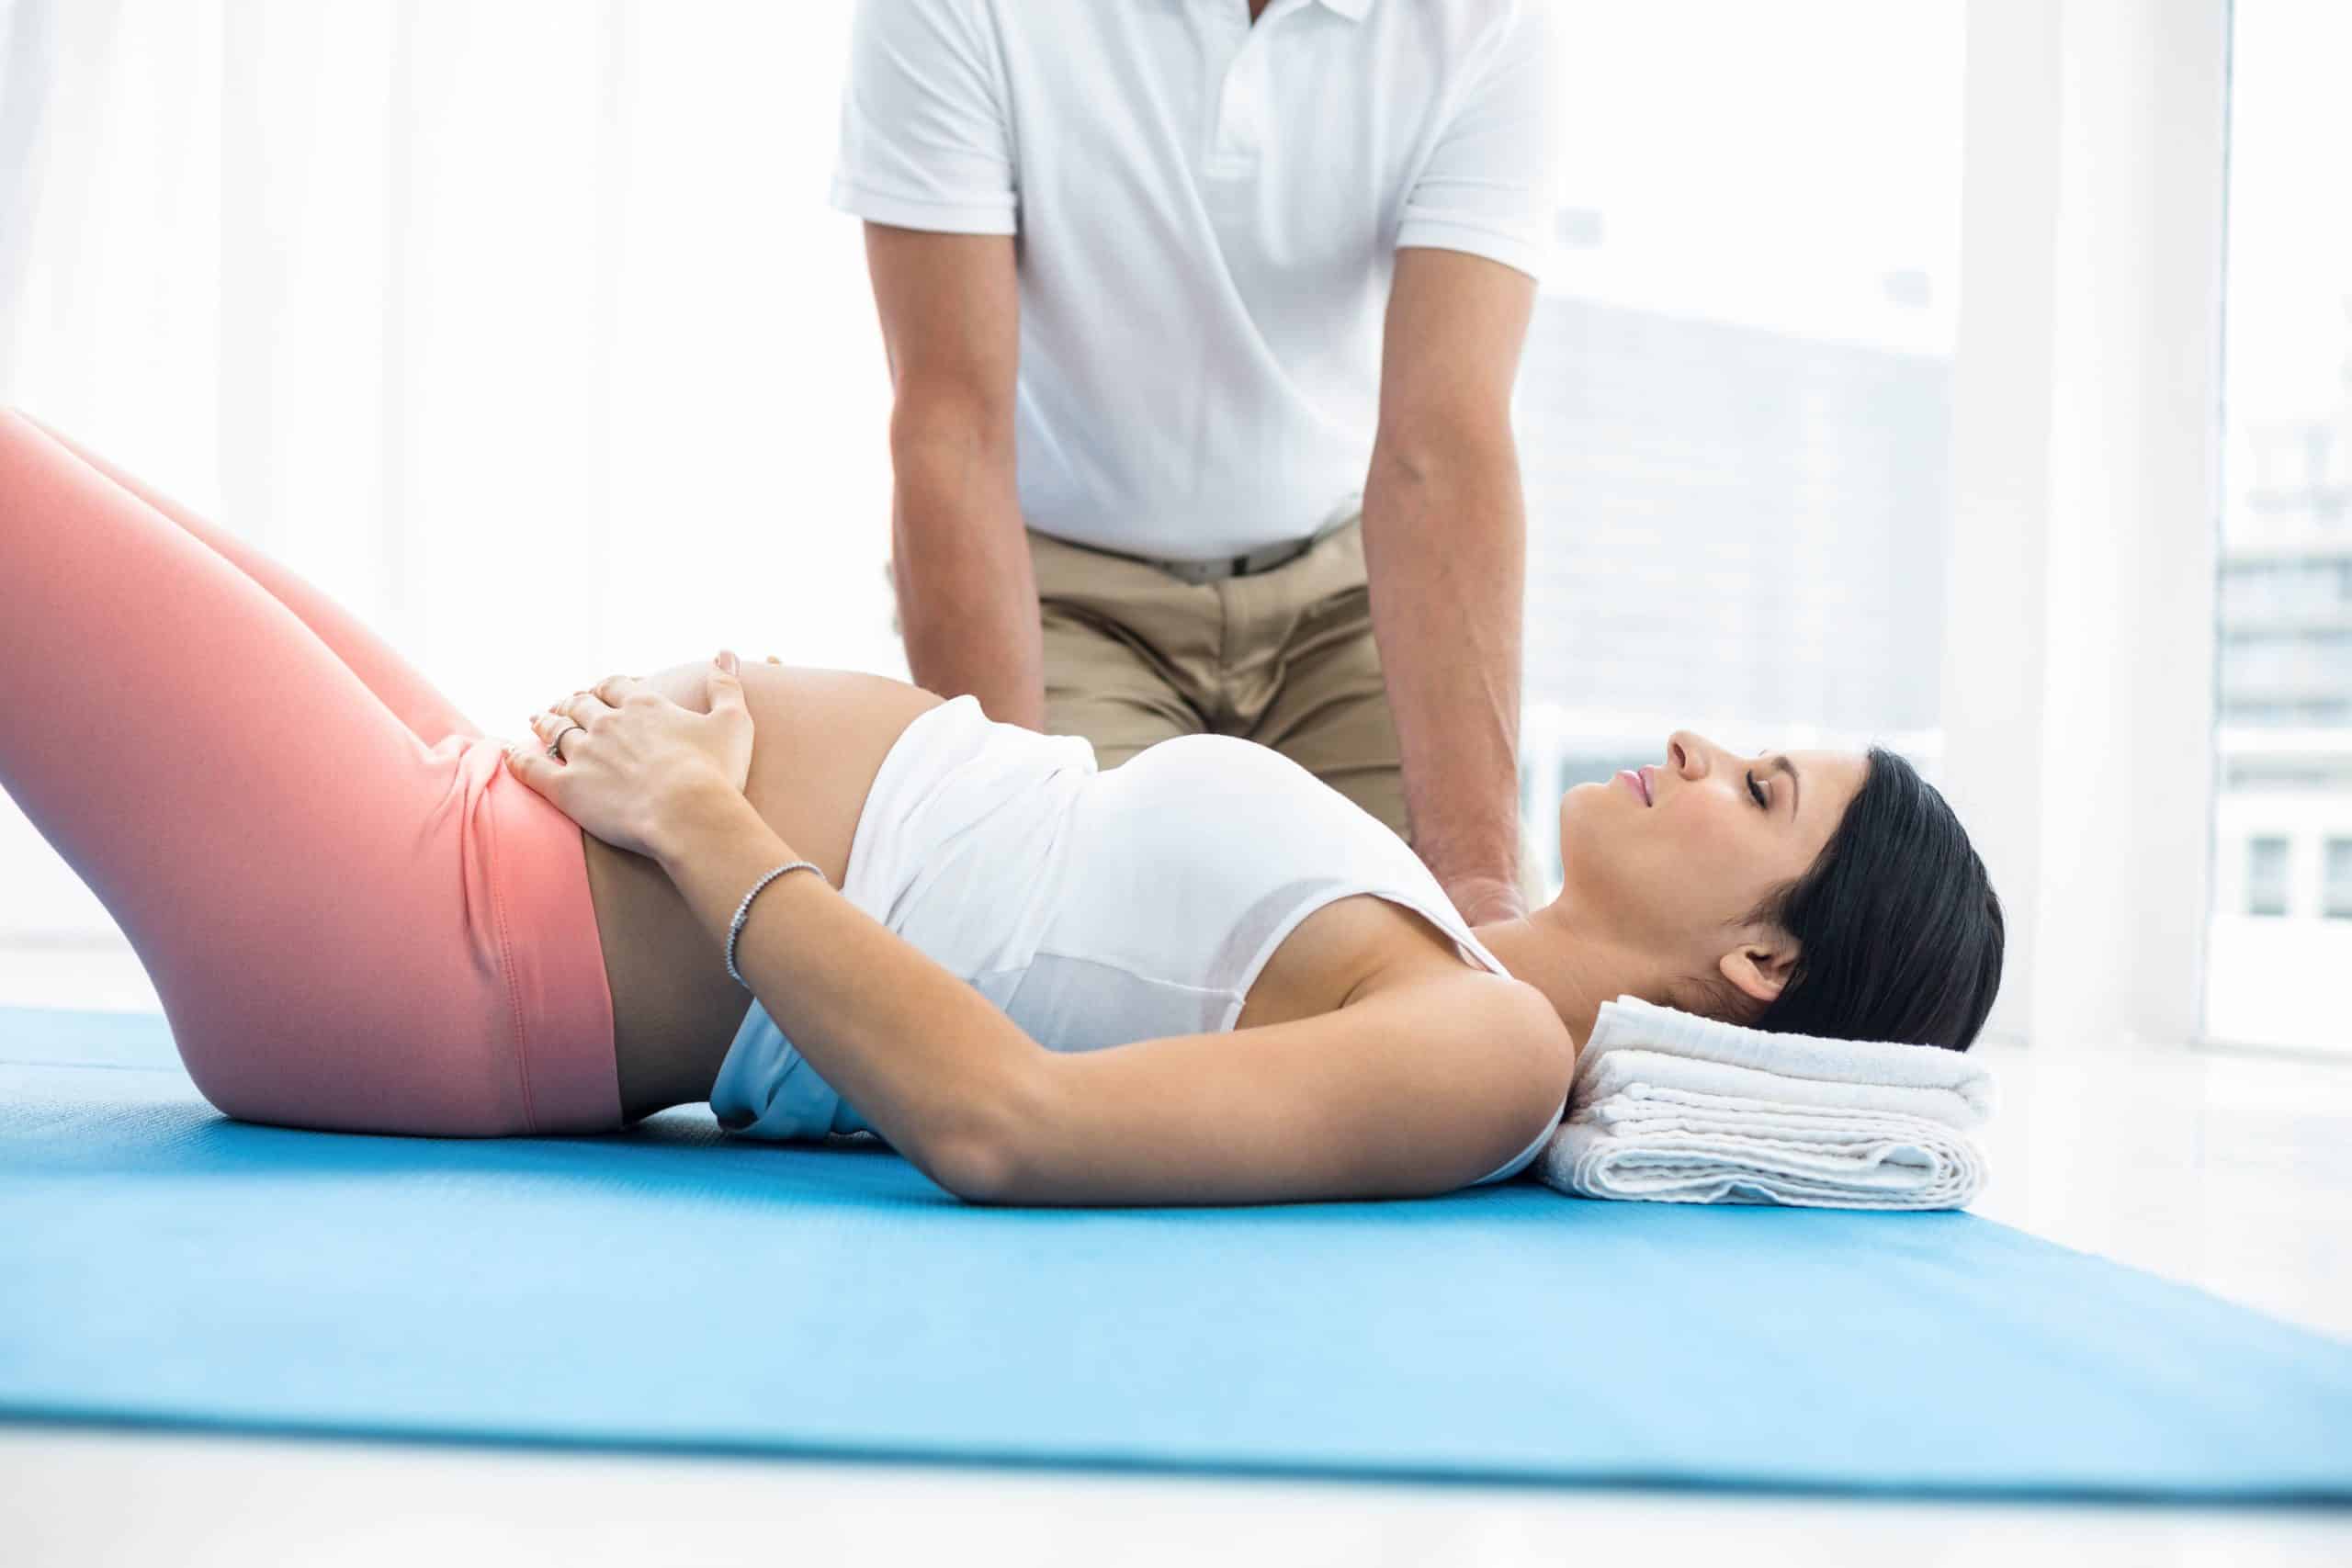 Pregnancy chiropractor treating a patient.